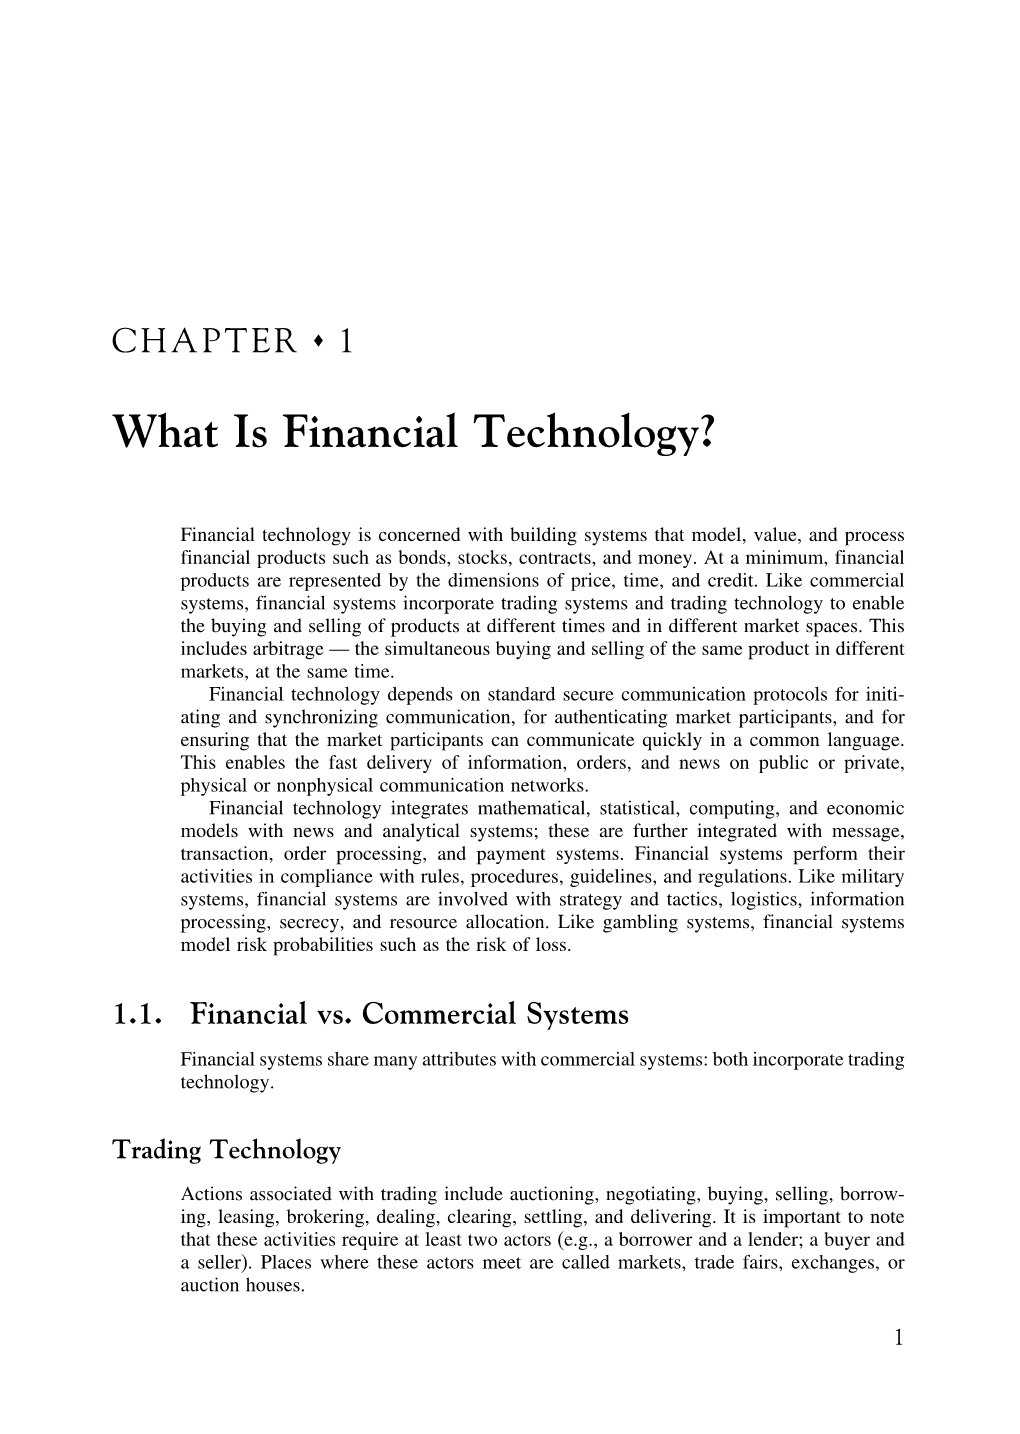 What Is Financial Technology?